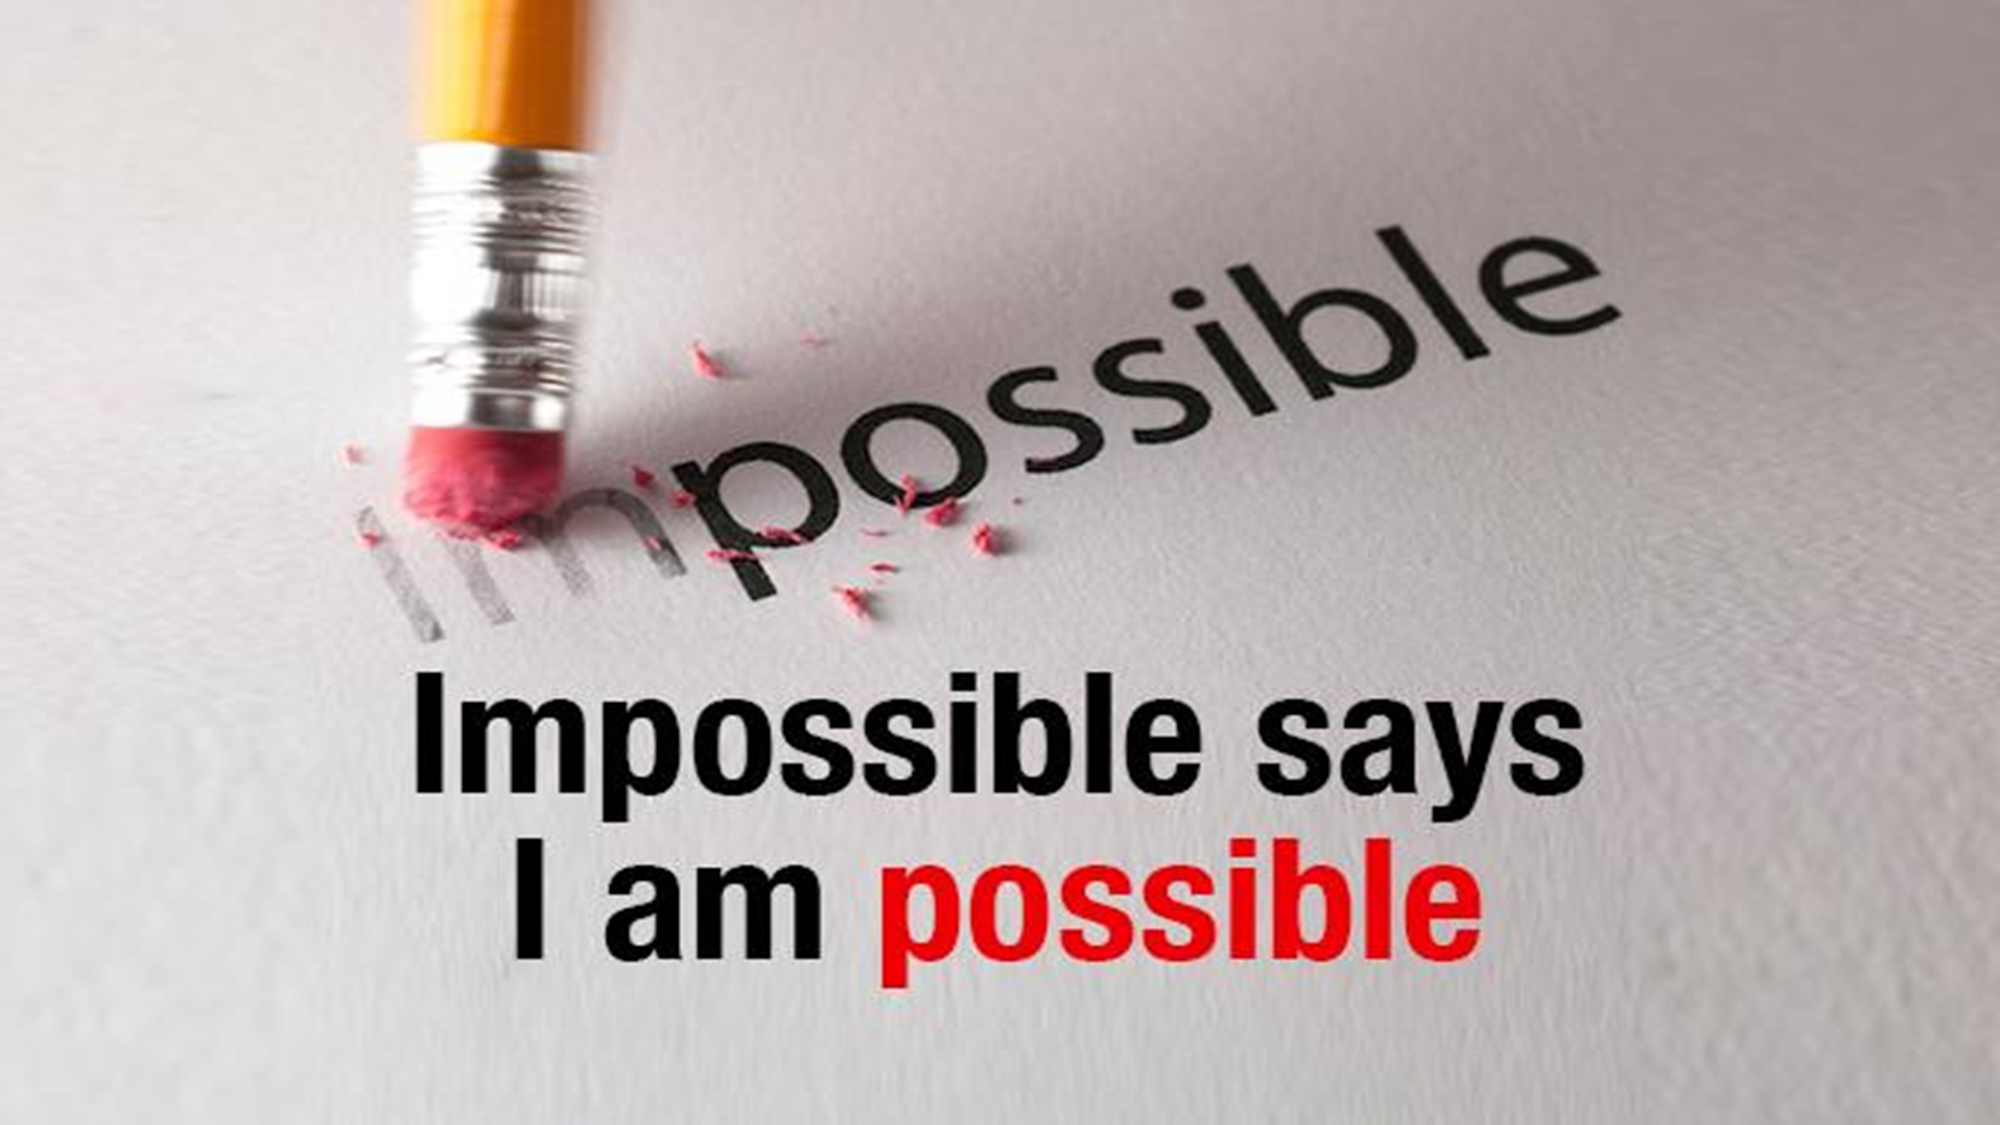 Possible Impossible. Картинка Impossible possible. Impossible is possible. Impossible надпись. The file is possible